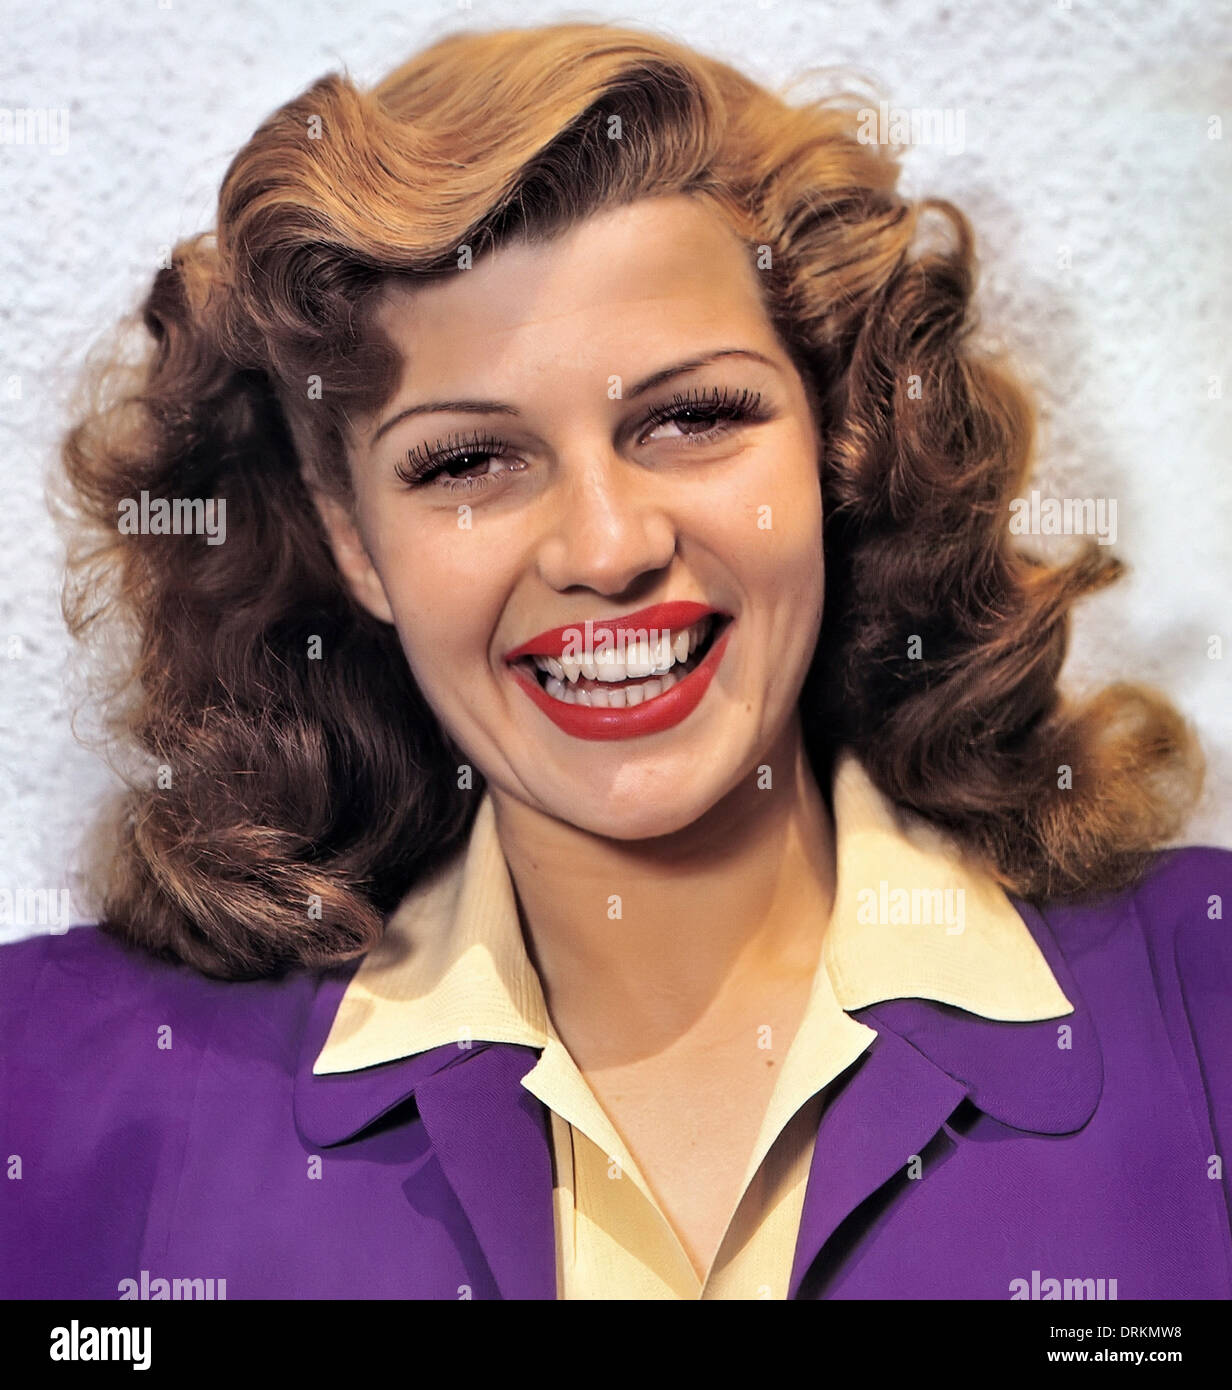 Hayworth images rita The remarkable